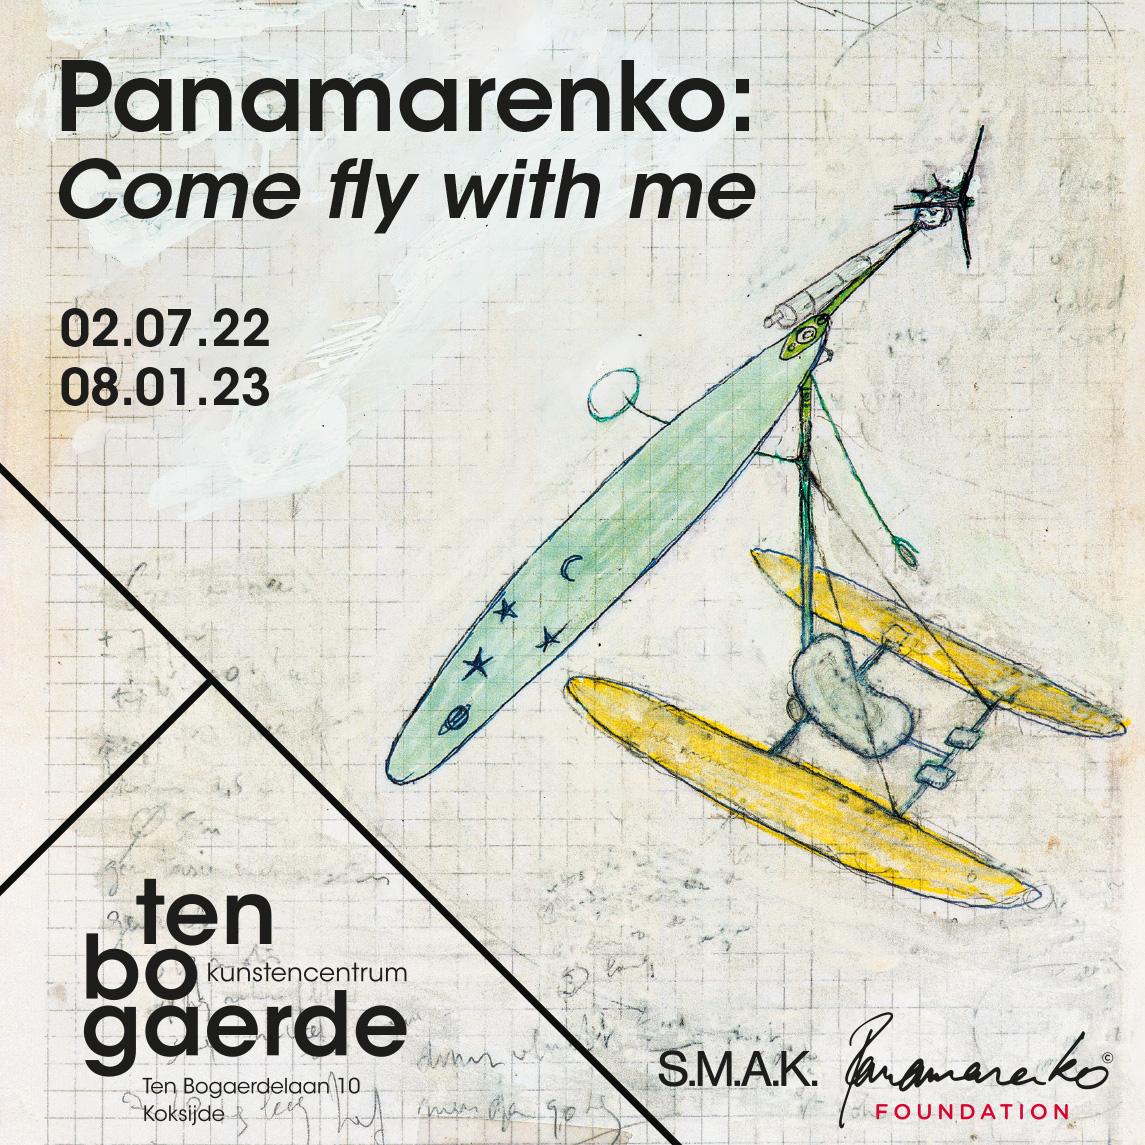 Panamarenko: come fly with me